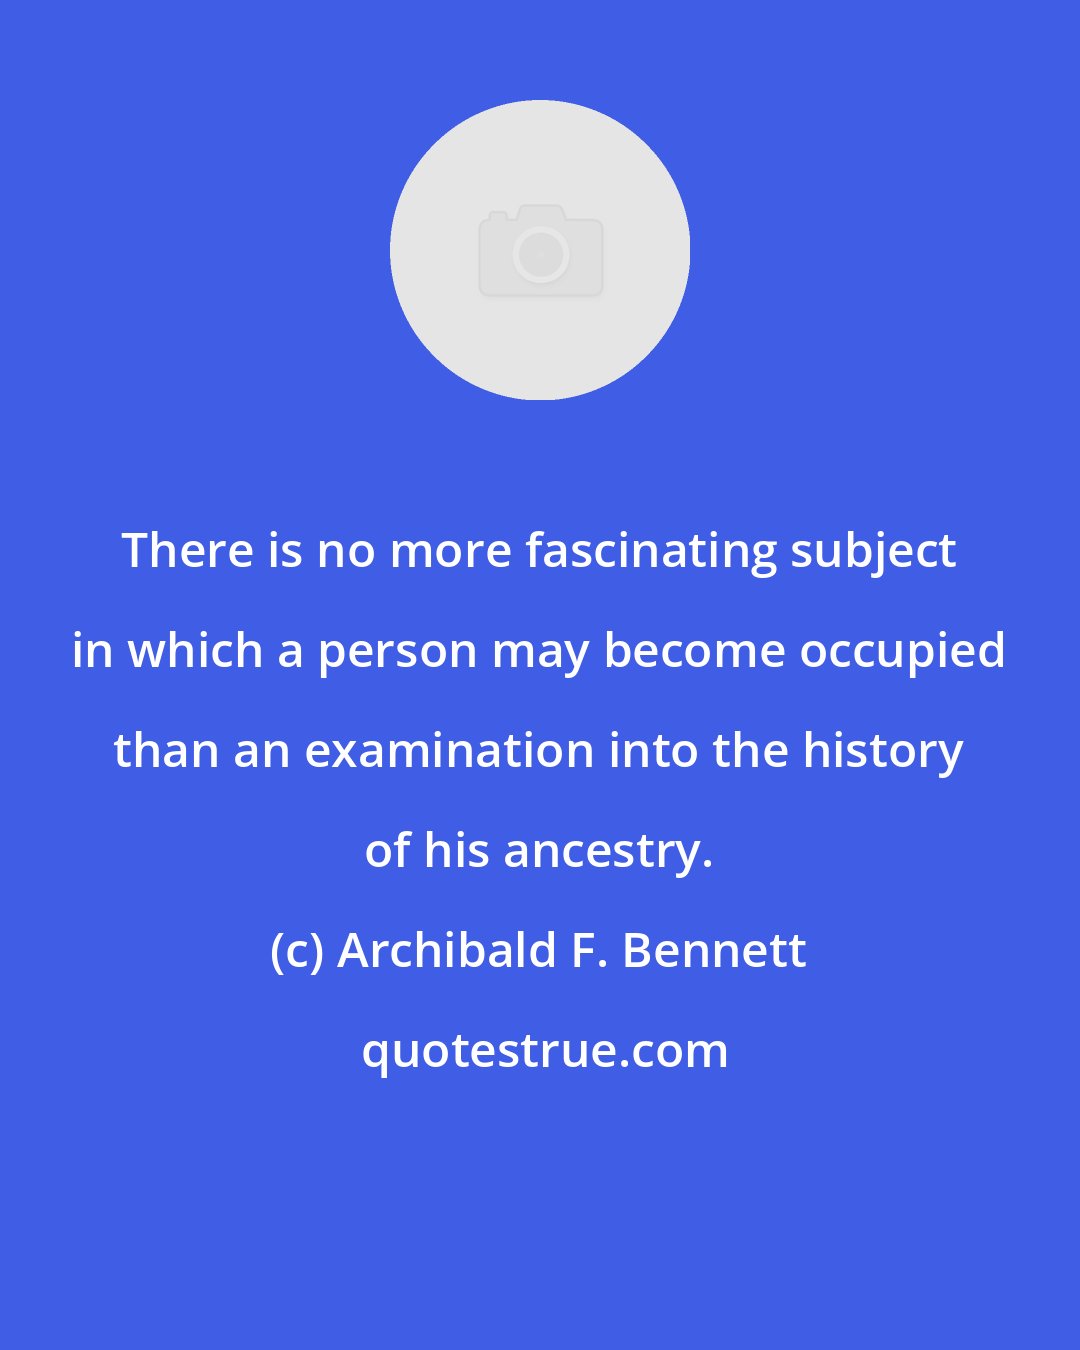 Archibald F. Bennett: There is no more fascinating subject in which a person may become occupied than an examination into the history of his ancestry.